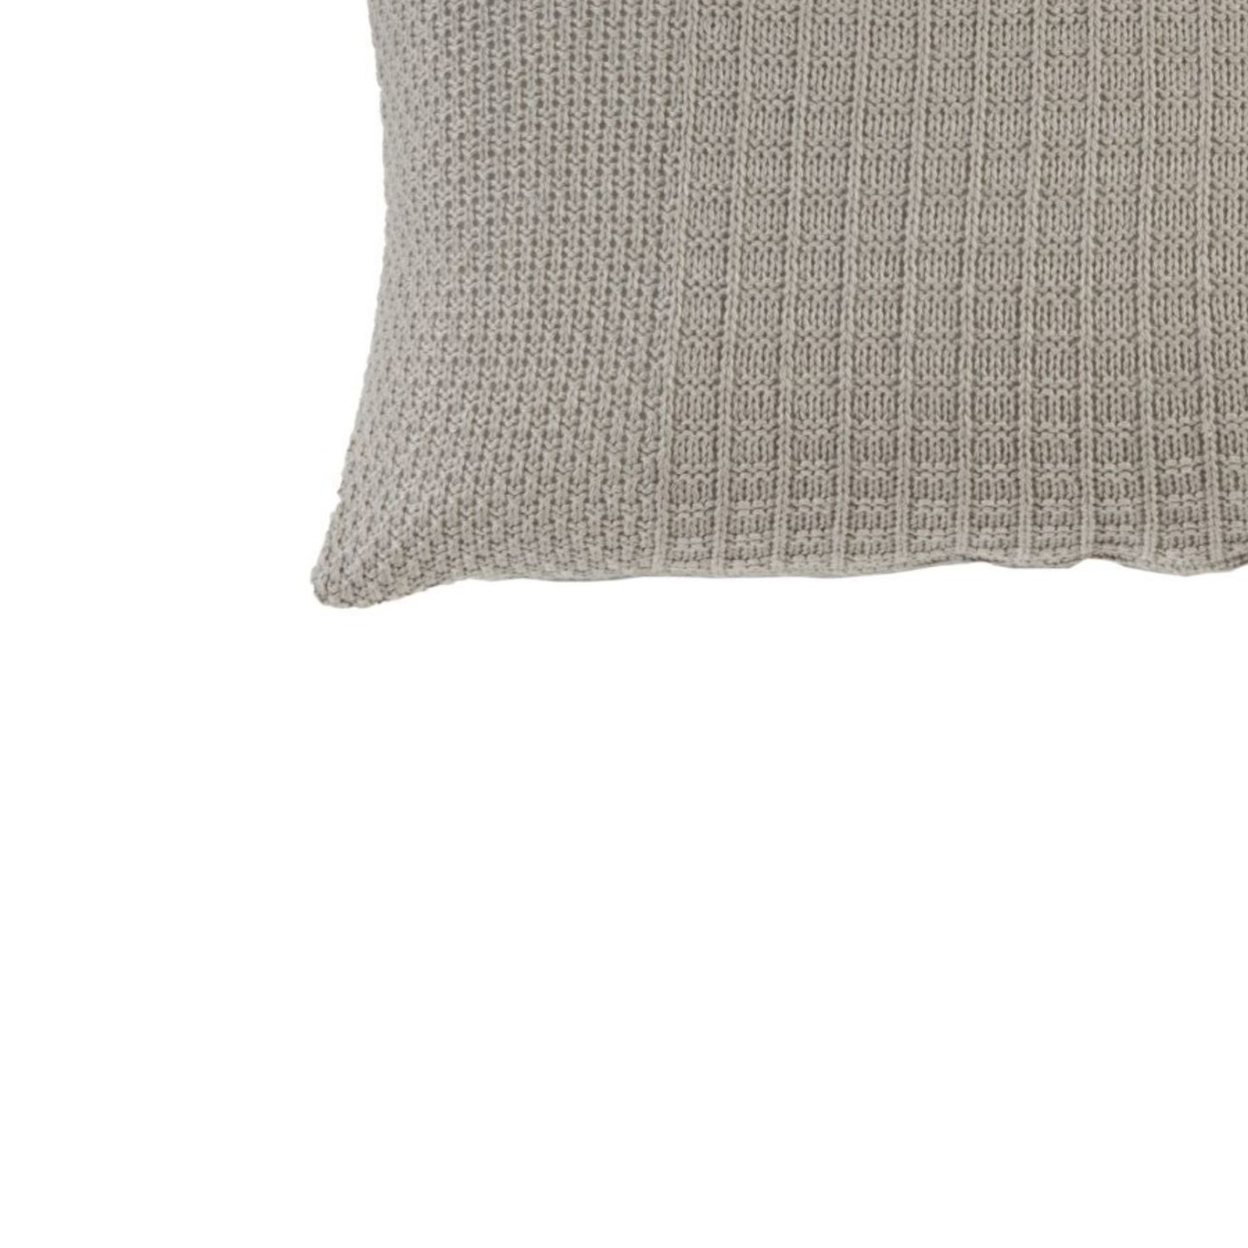 Fabric Accent Pillow With Knitted Pattern Details, Gray- Saltoro Sherpi